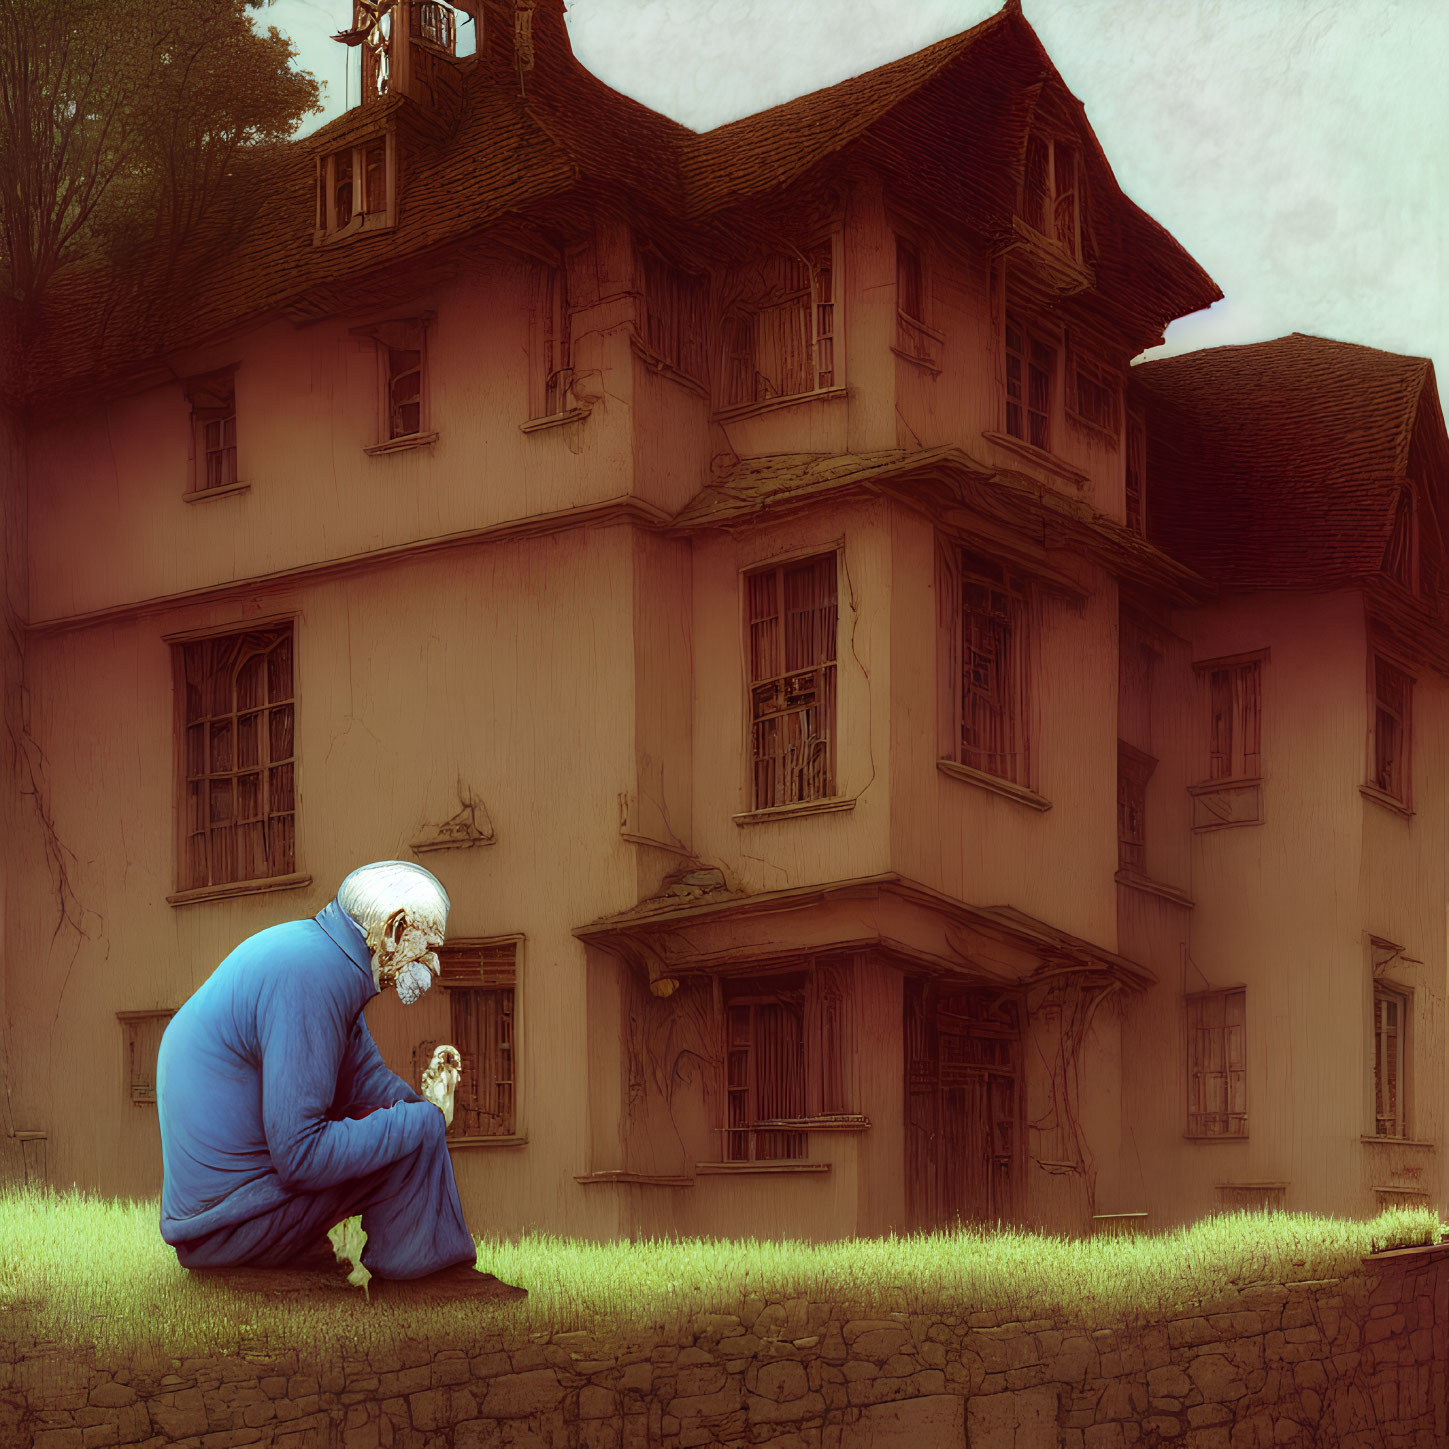 Giant elderly figure in blue clothes beside small traditional house in surreal setting